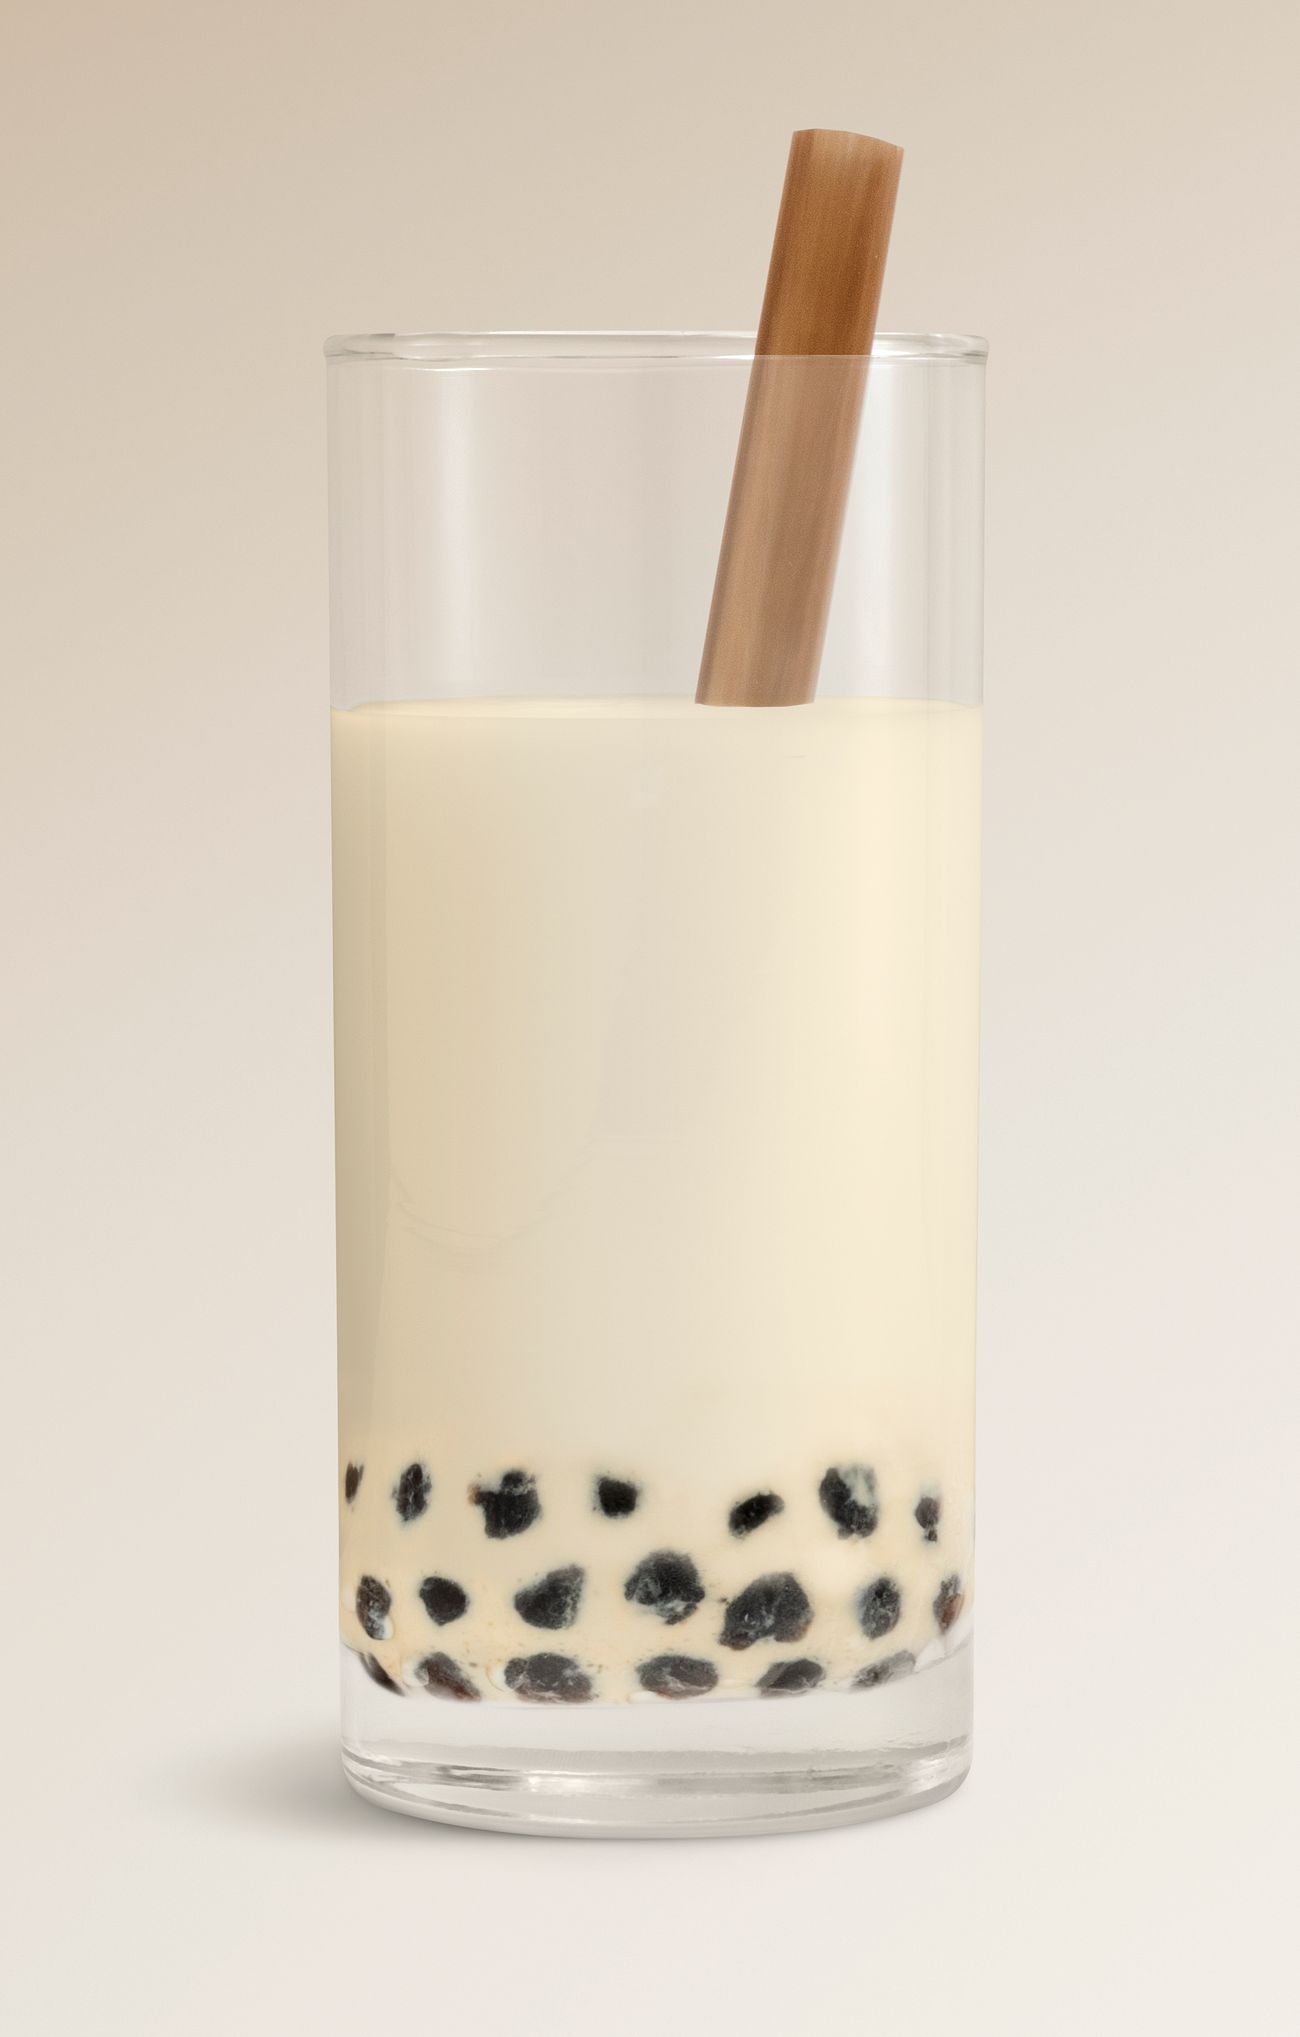 Bubble milk tea in a glass design resource | Royalty free psd mockup - 2382289